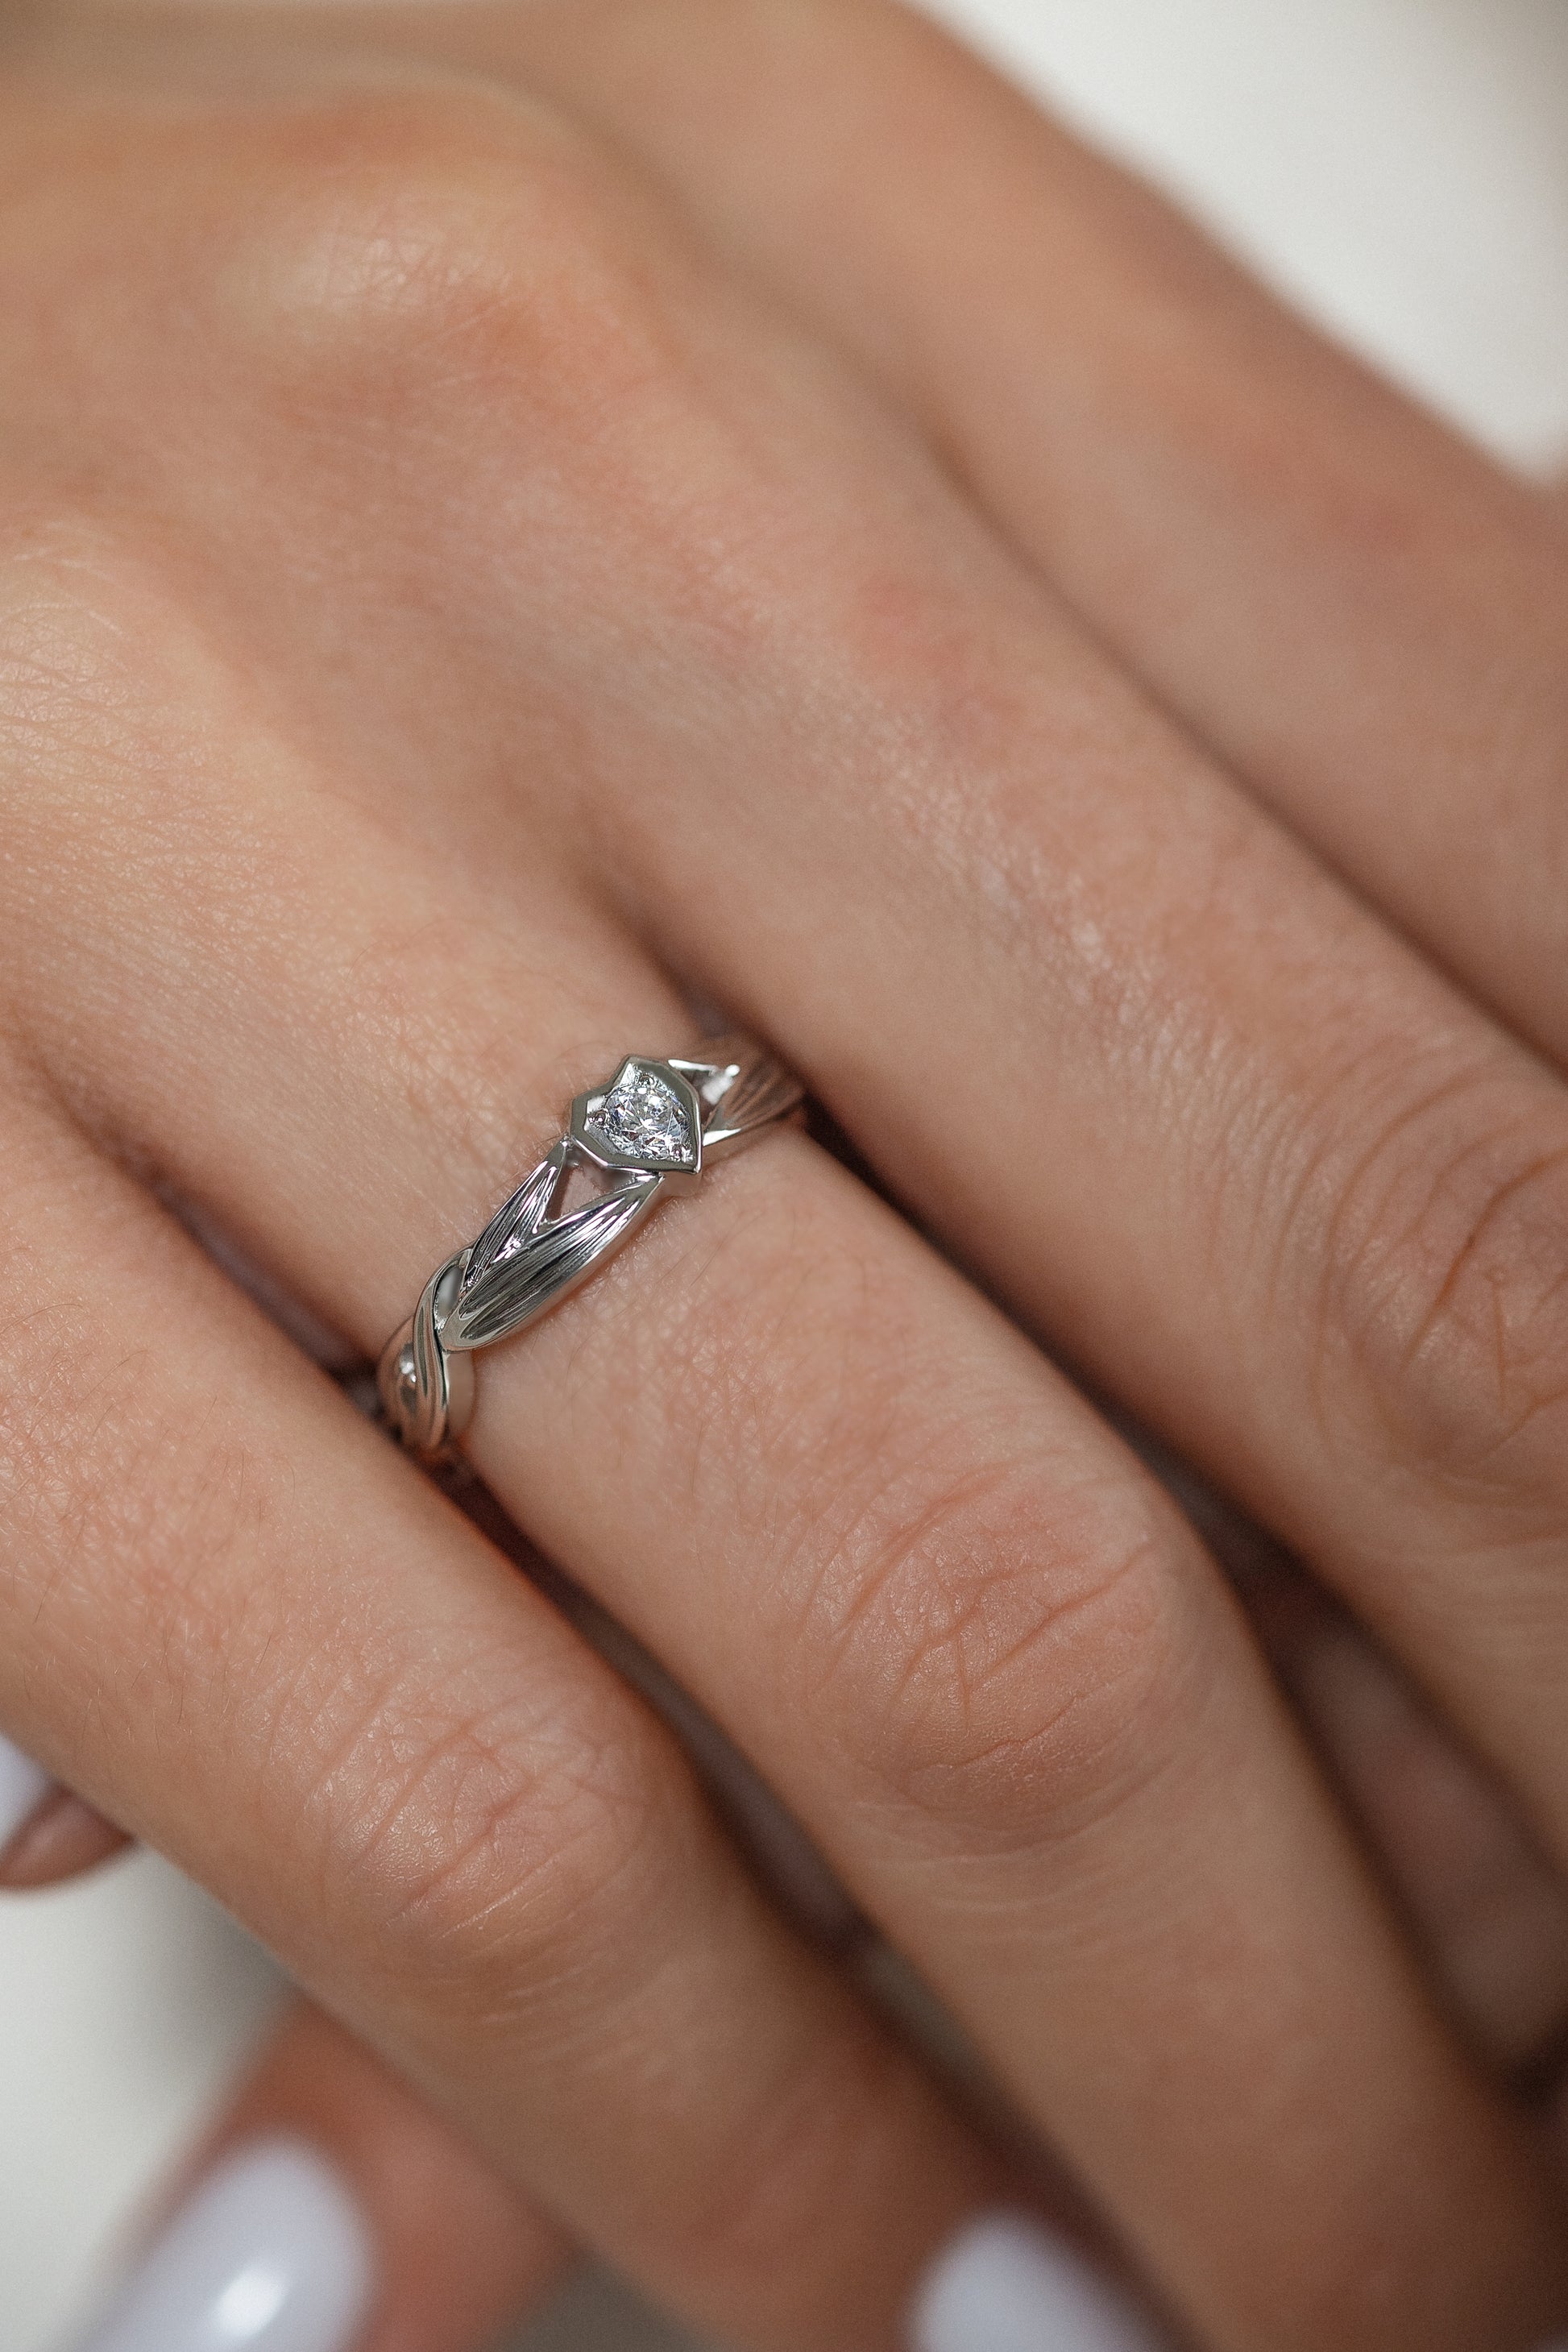 Unique engagement ring with natural diamond. Diamond proposal ring. White gold diamond ring. Diamond engagement ring. Heart engagement ring. Diamond heart ring.